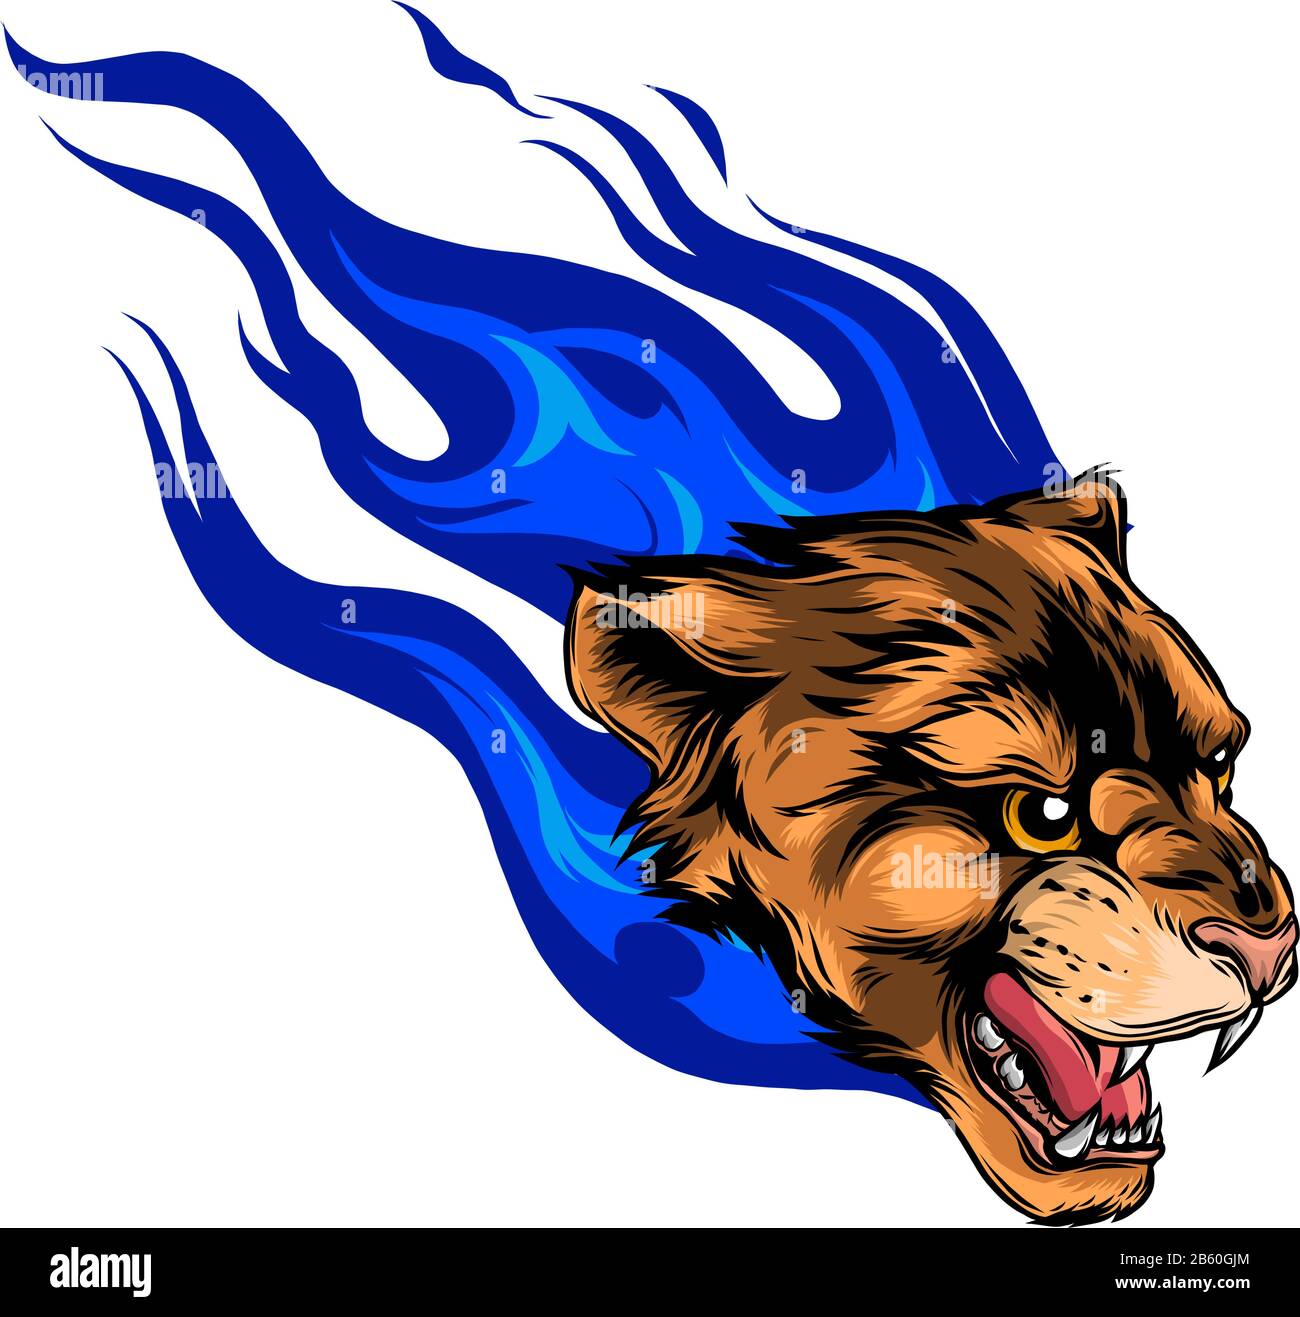 Jaguar head with Flame Tattoo vector illustration Stock Vector